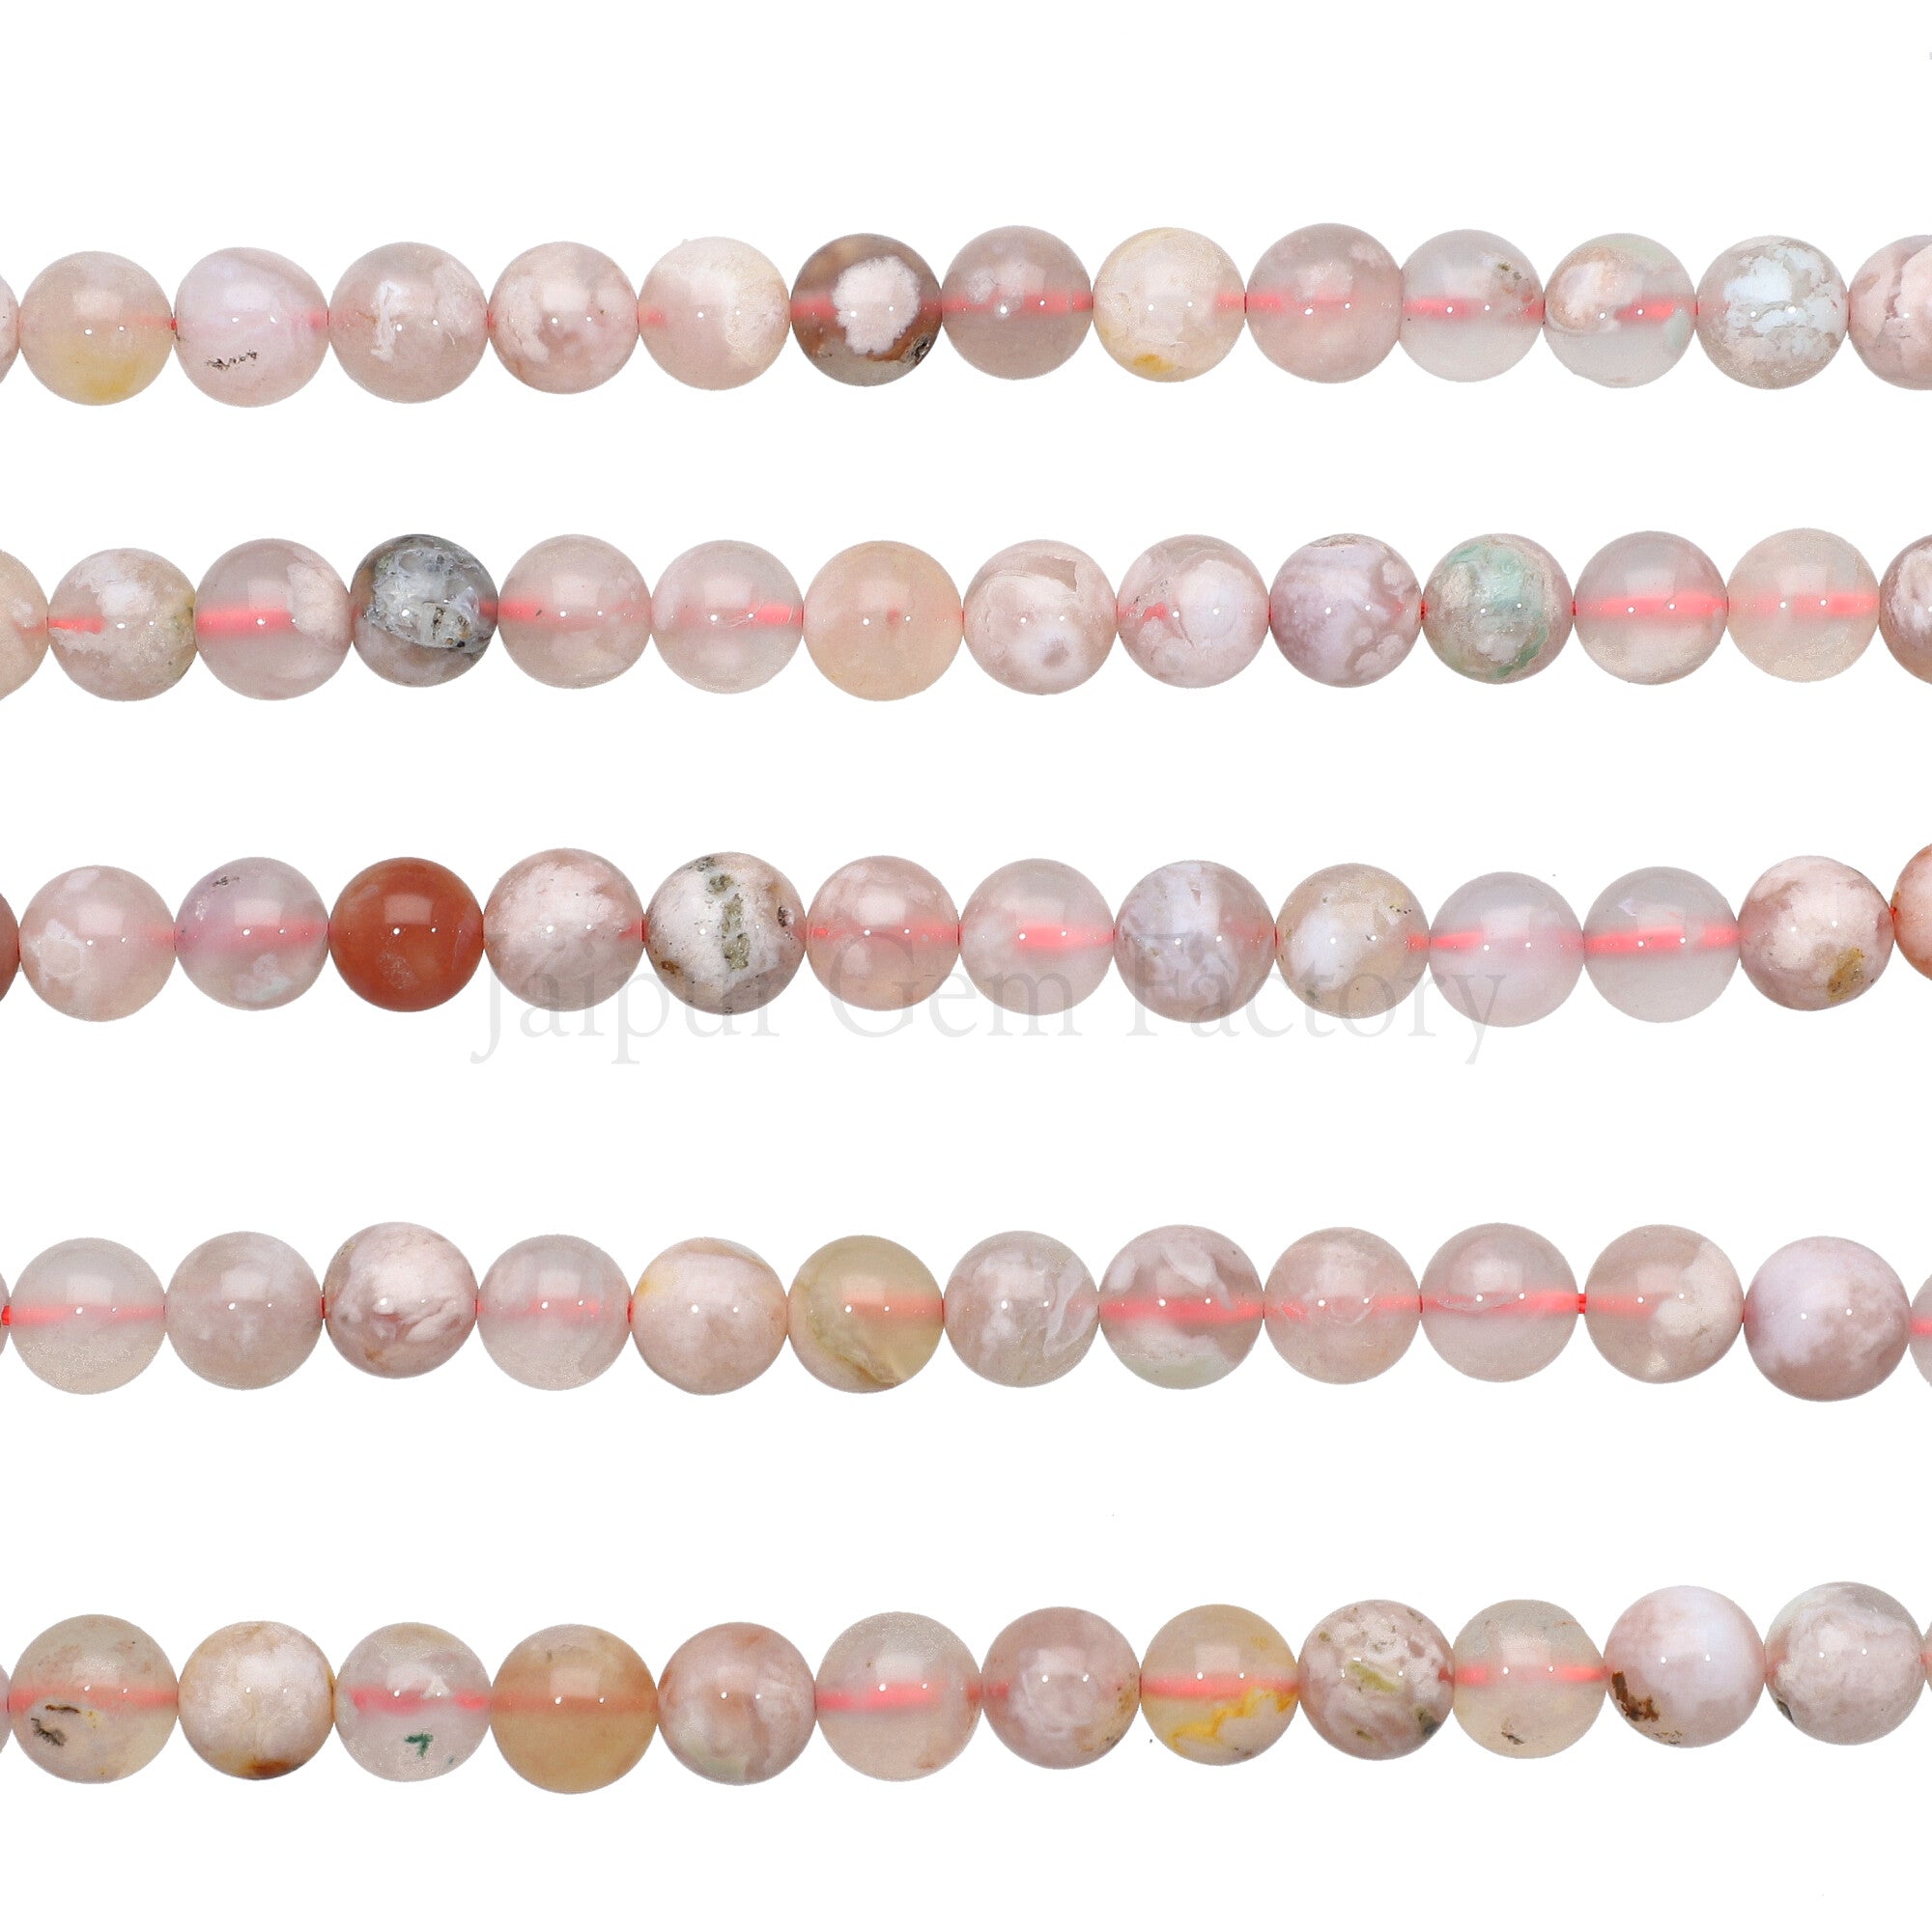 8 MM Pink Agate Smooth Round Beads 15 Inches Strand